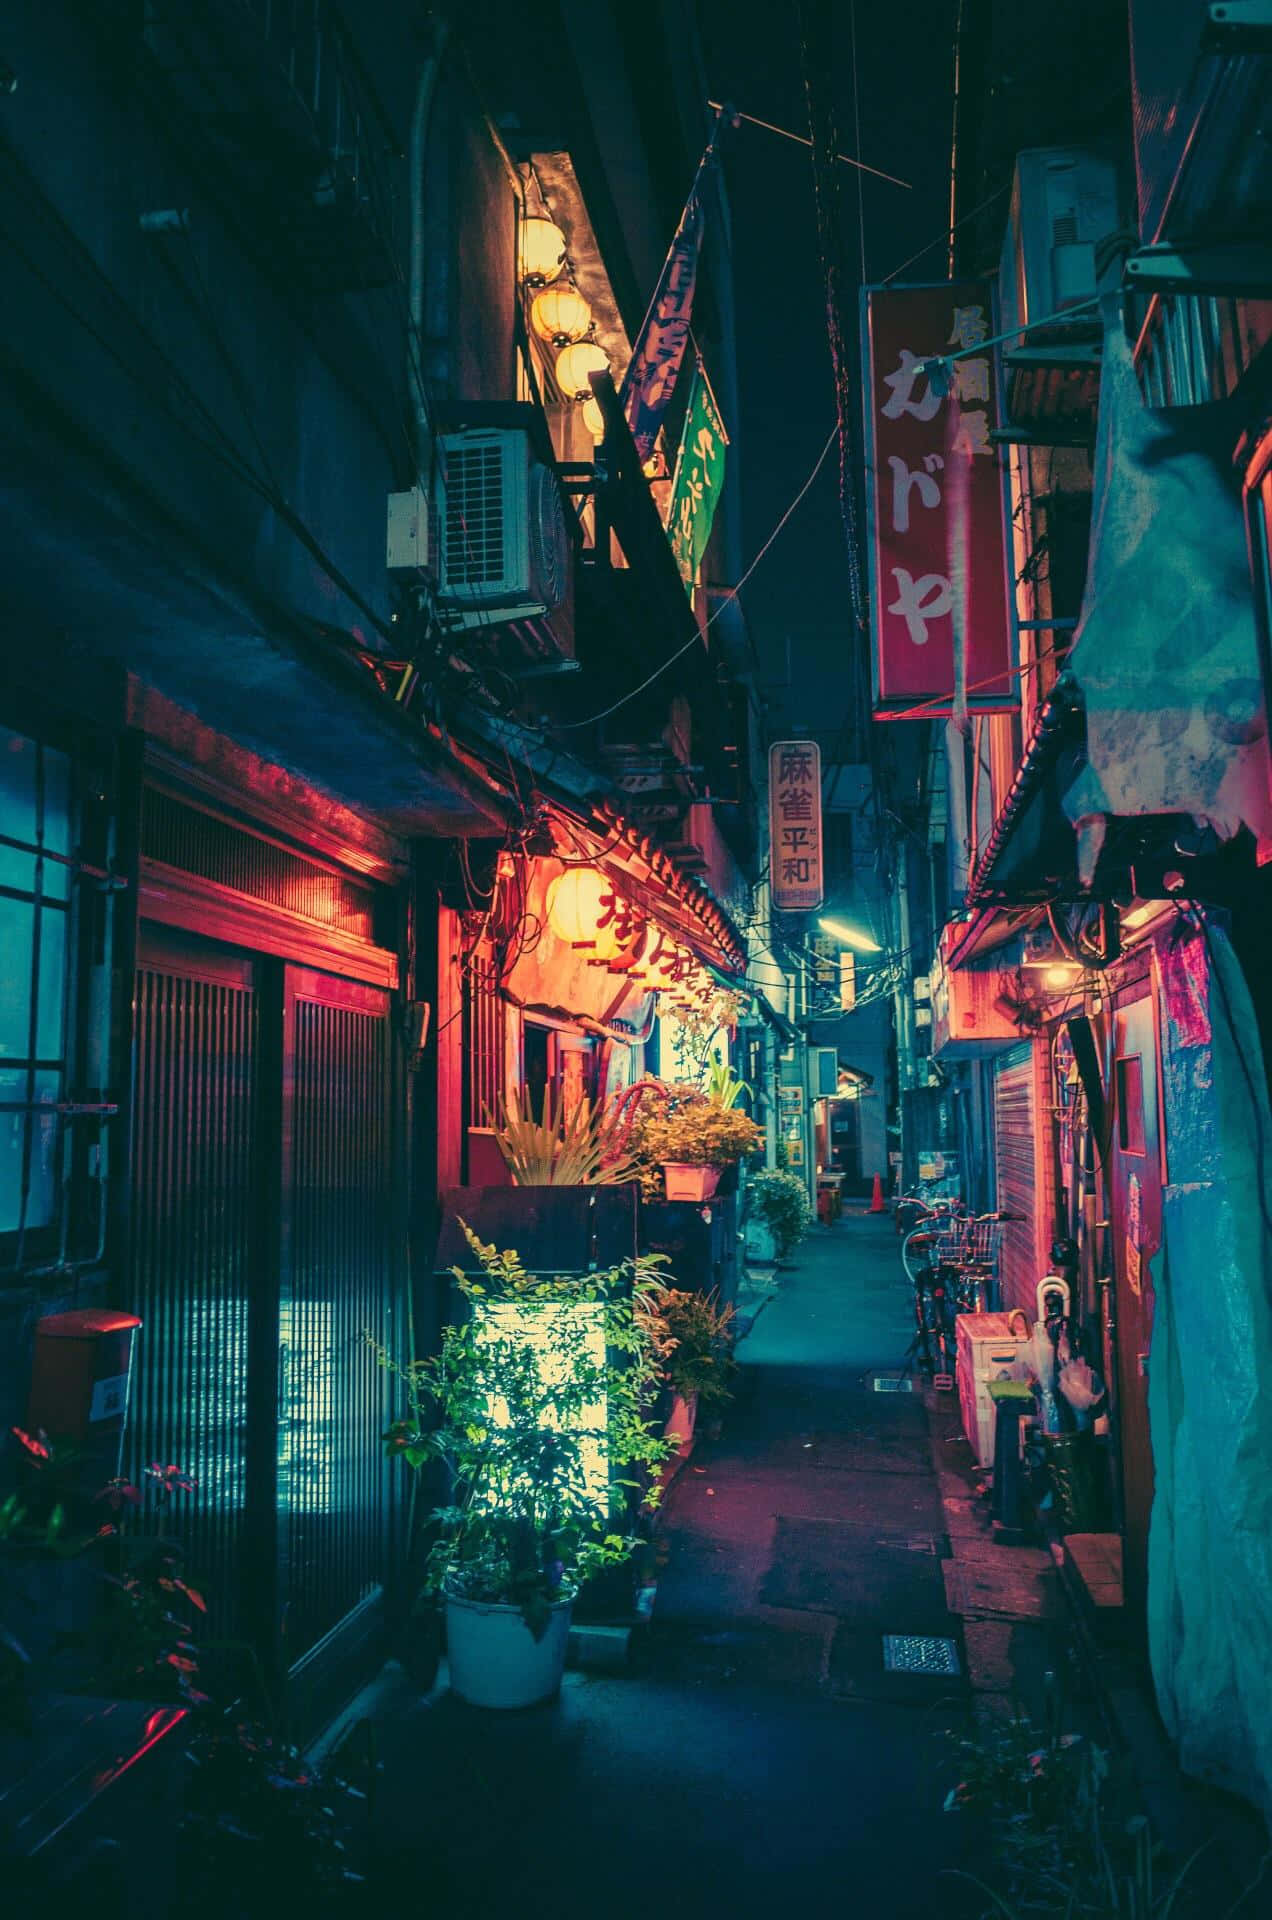 A Narrow Alleyway With A Lot Of Lights